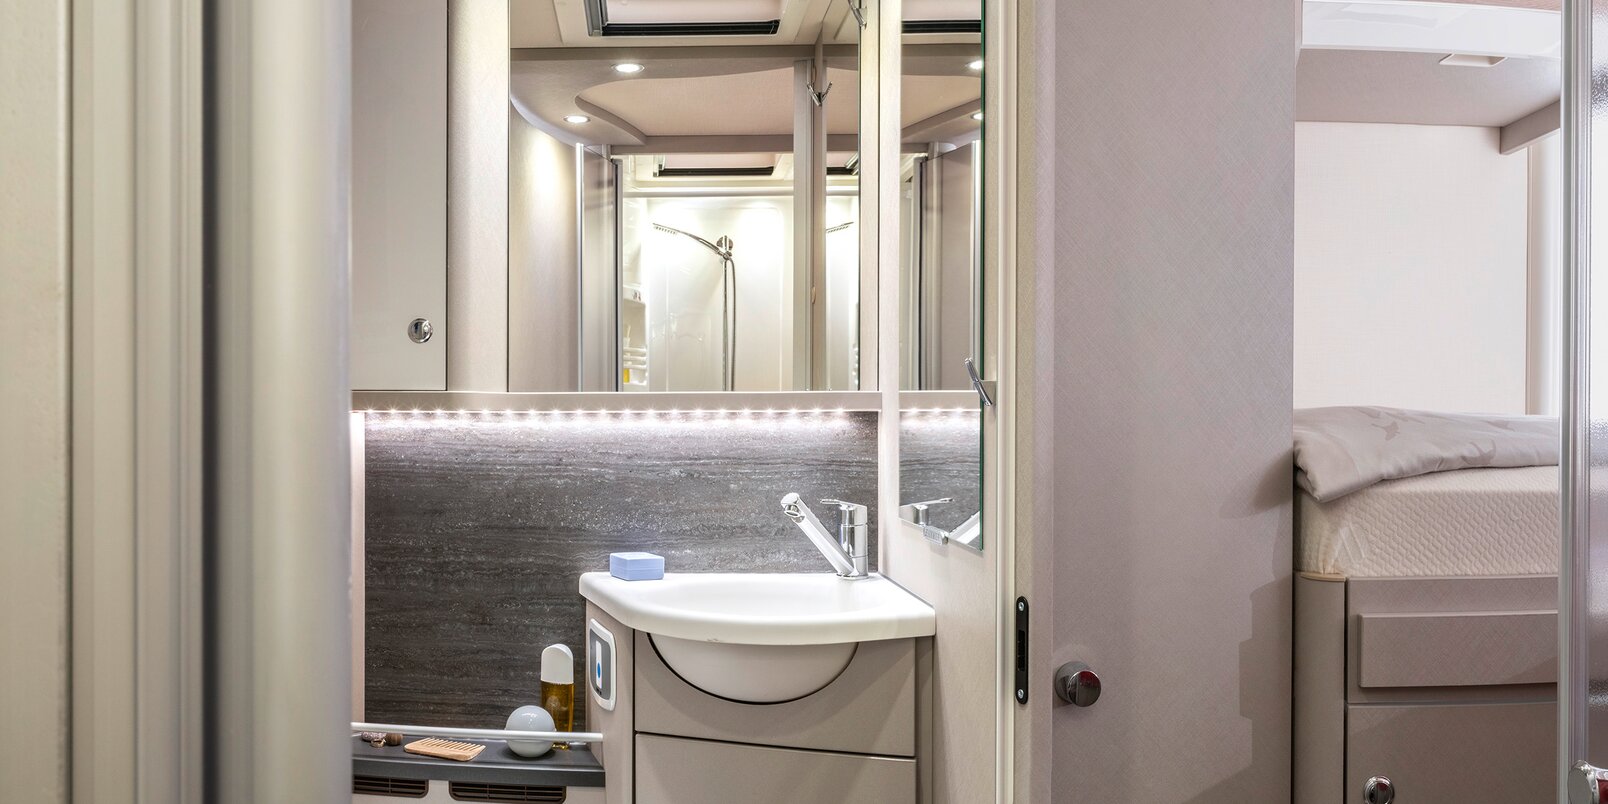 Bathroom in the HYMER Exsis-i 678 with toilet, wash basin, storage cupboards, mirror, and skylight